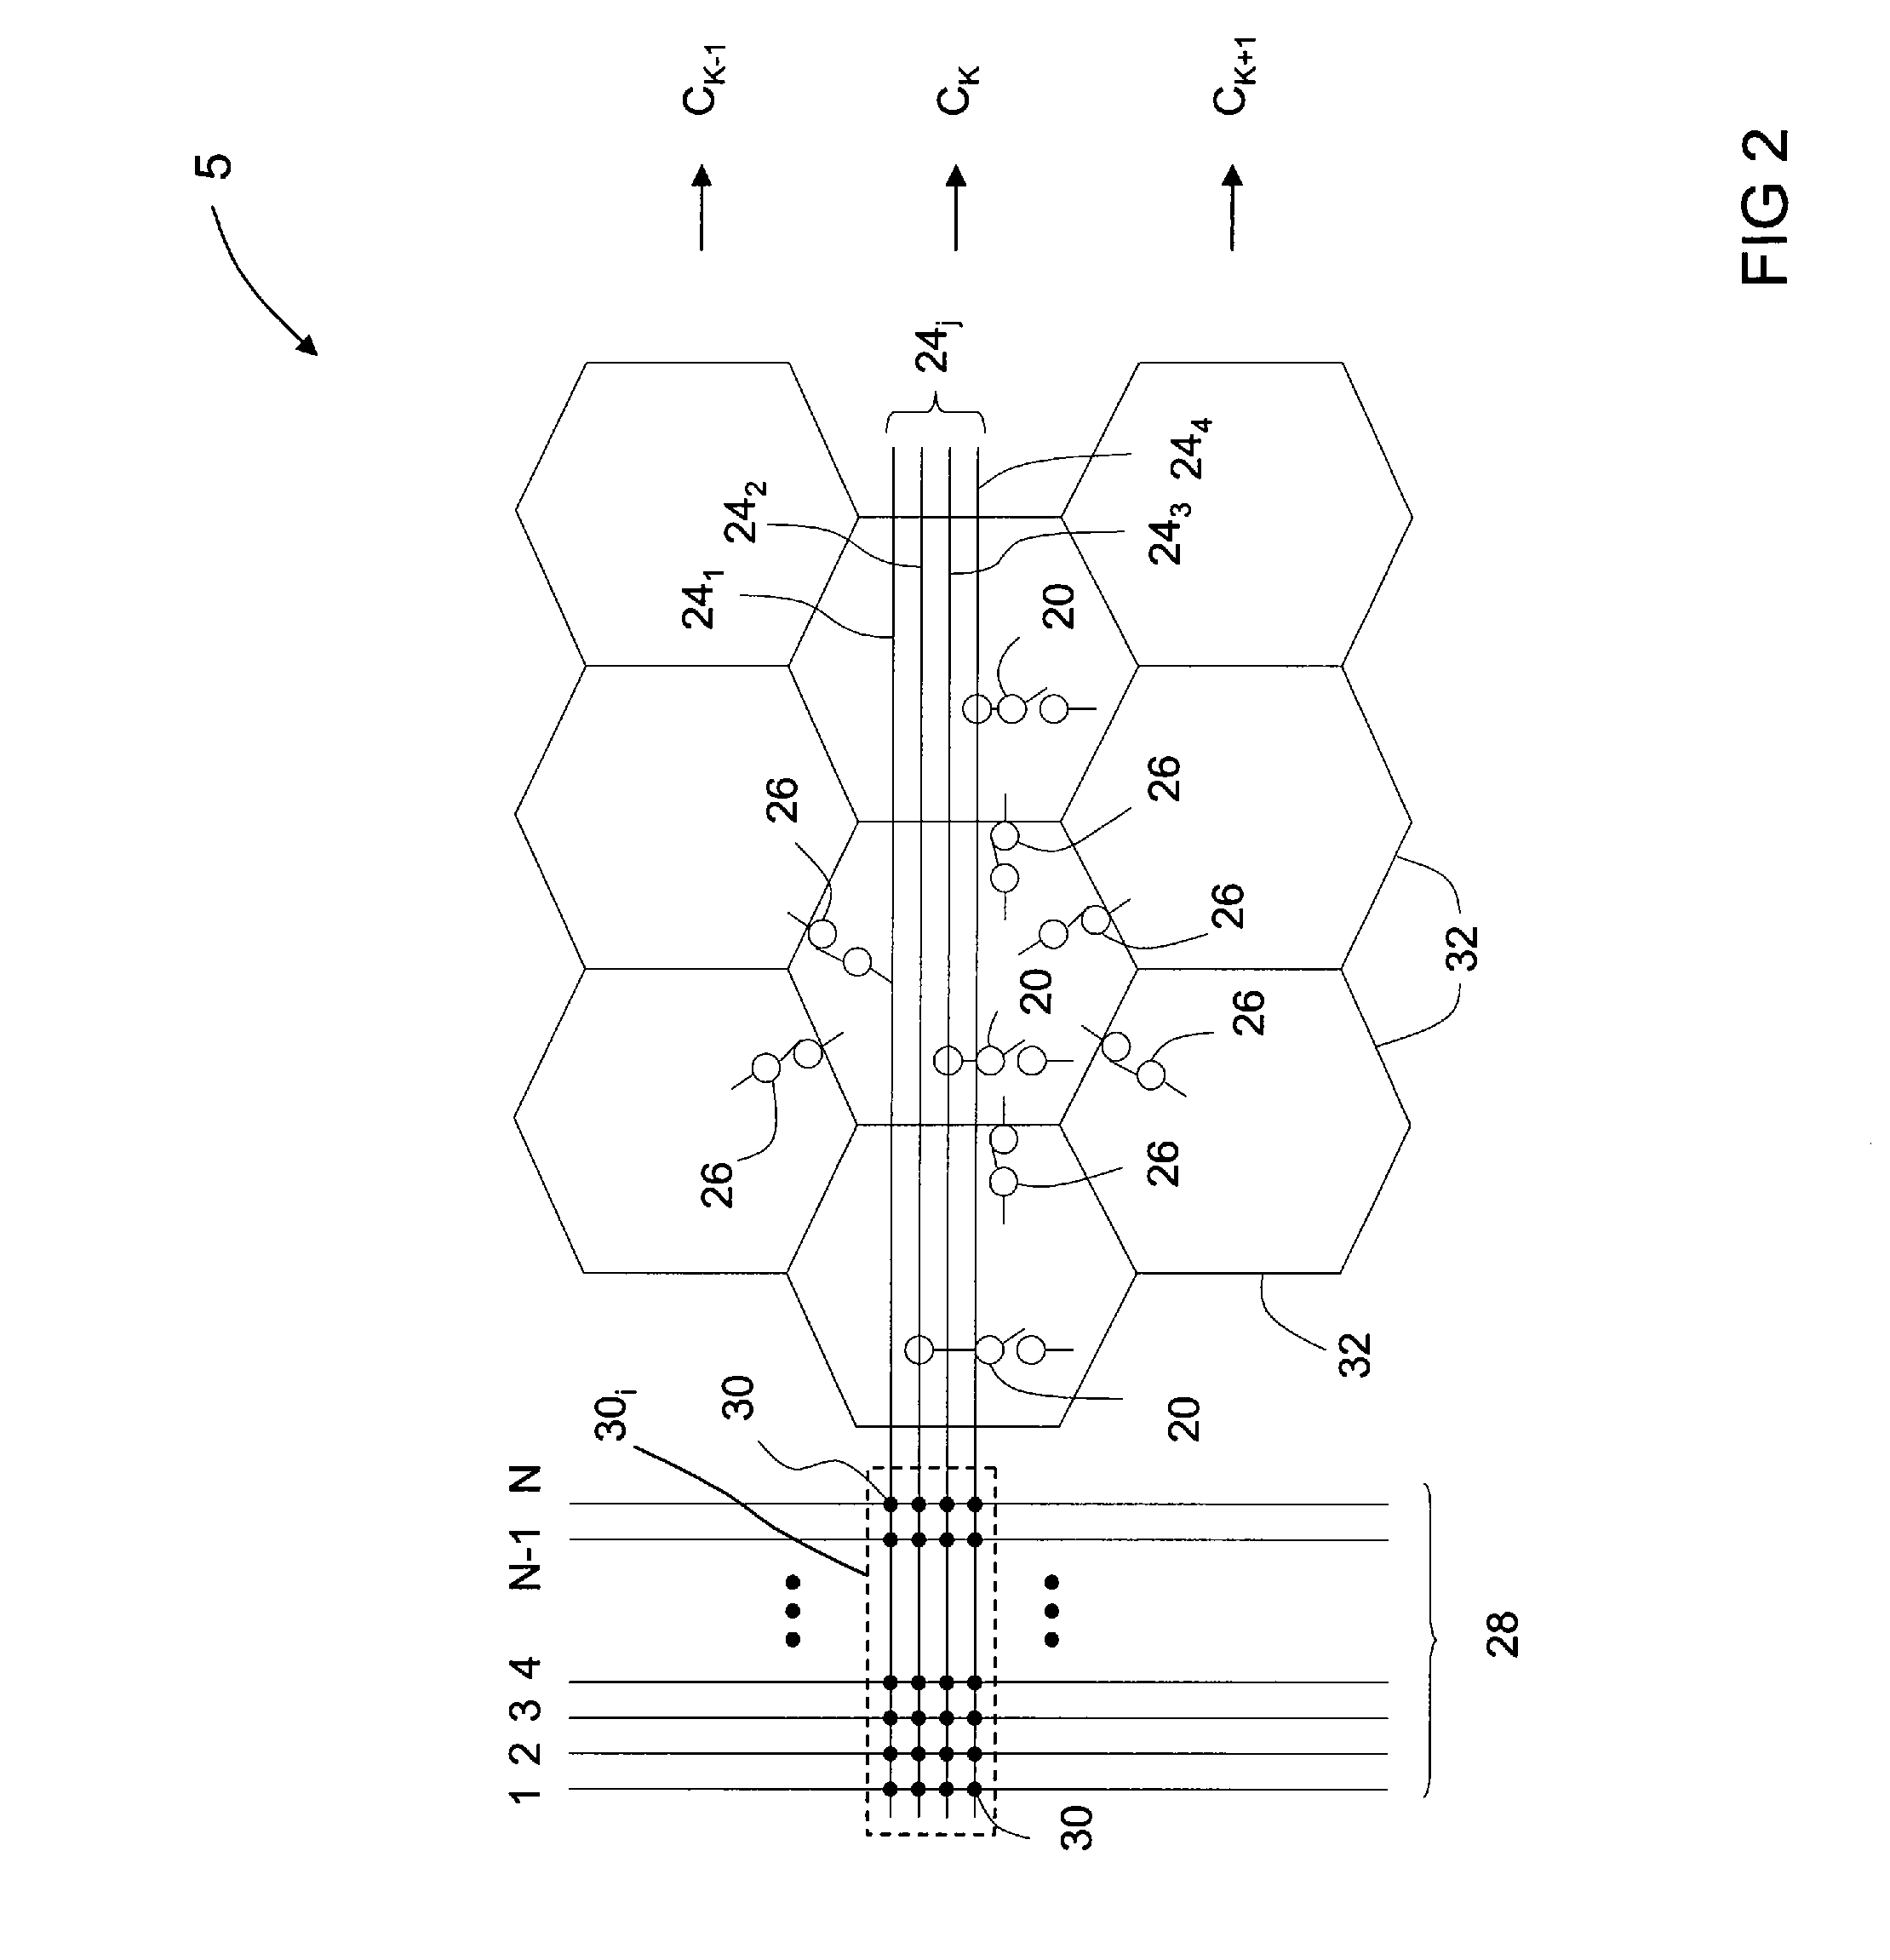 Ultrasound System With Integrated Control Switches